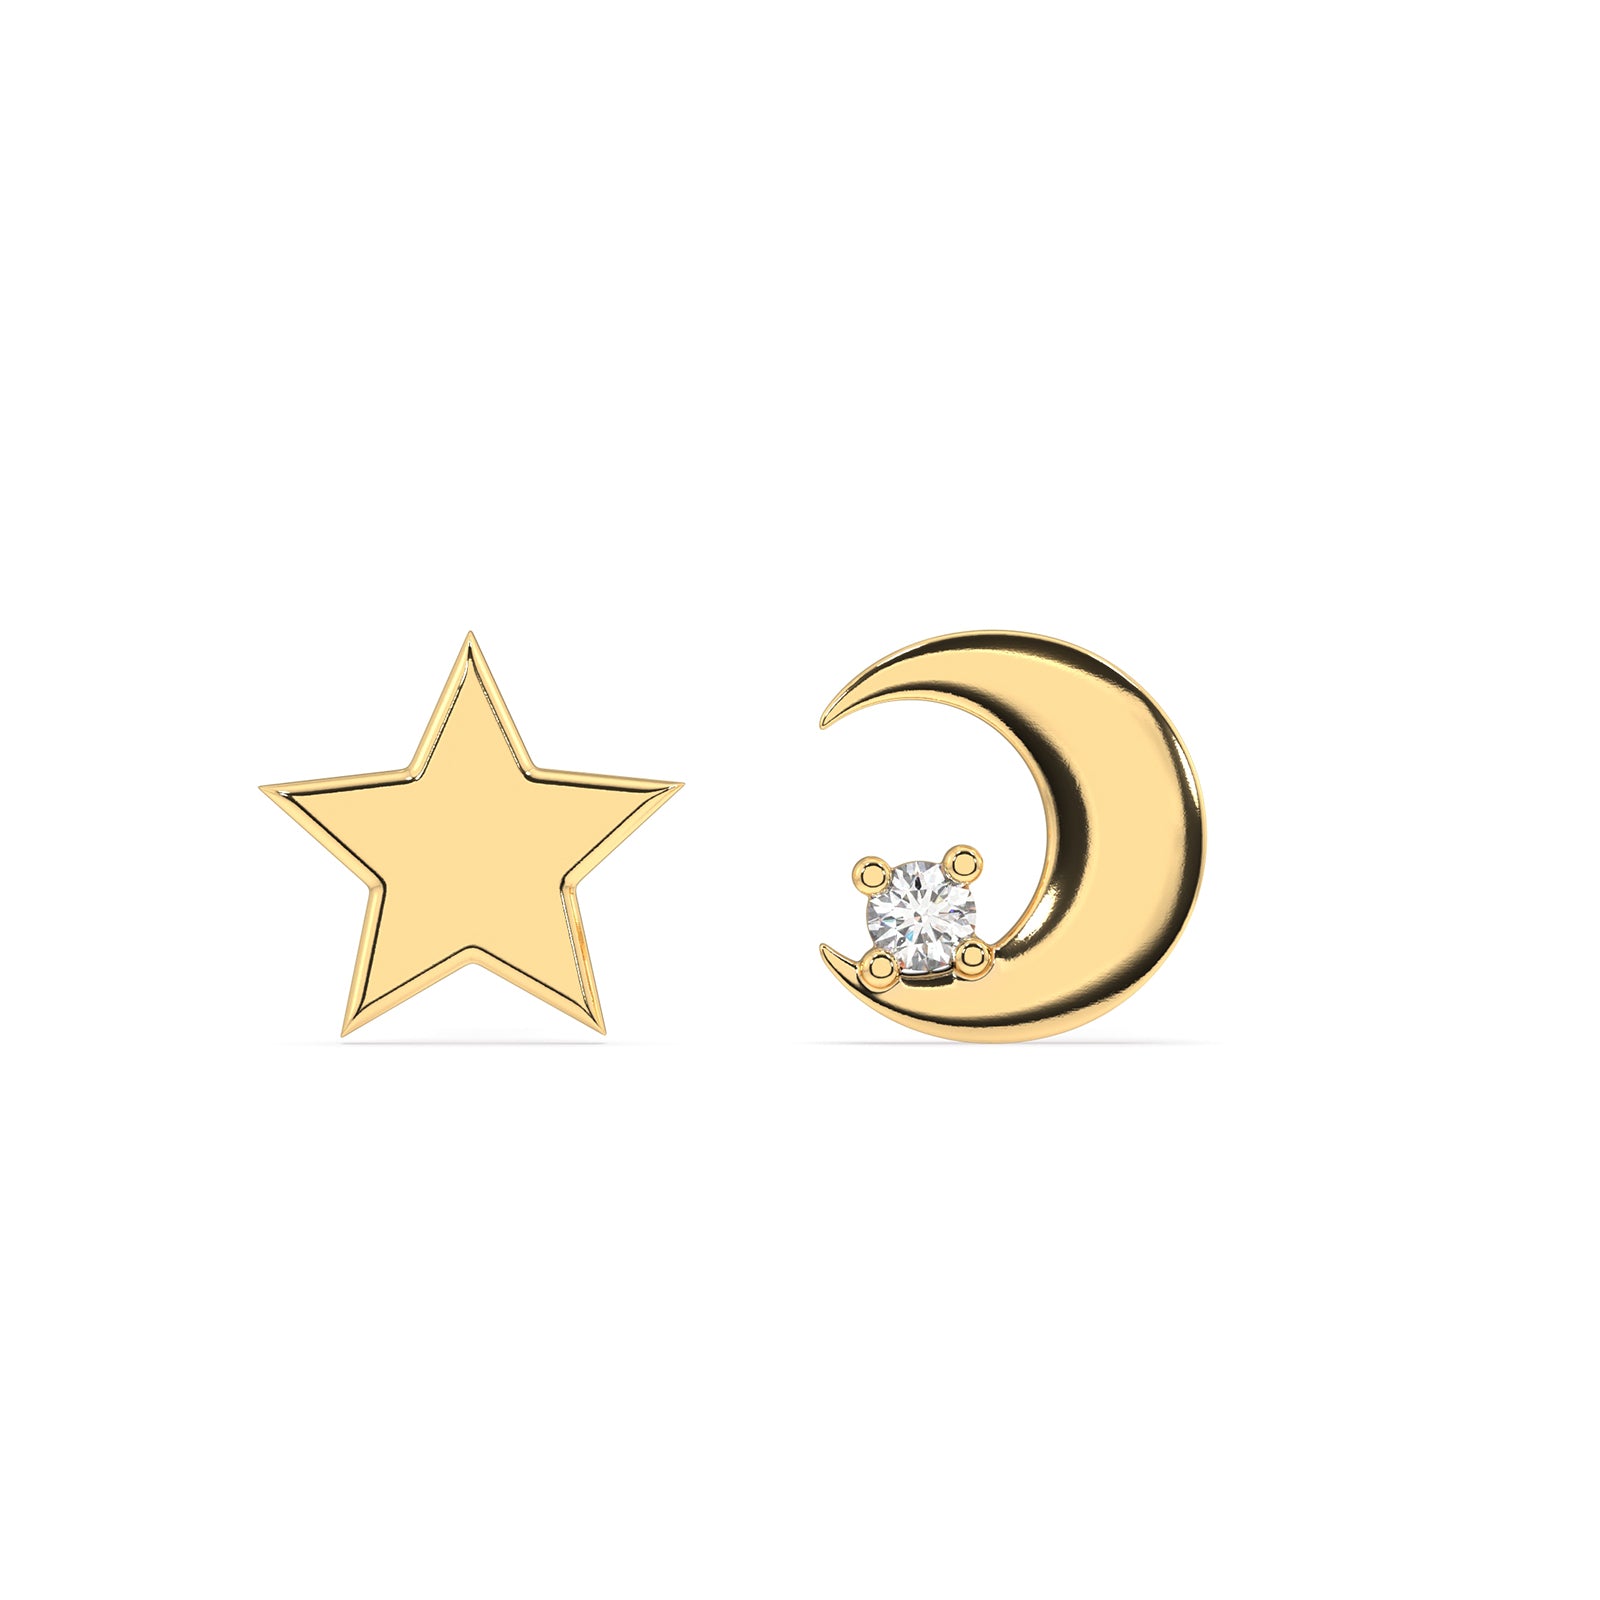 mismatched Star with a moon combination stud earring - Pair